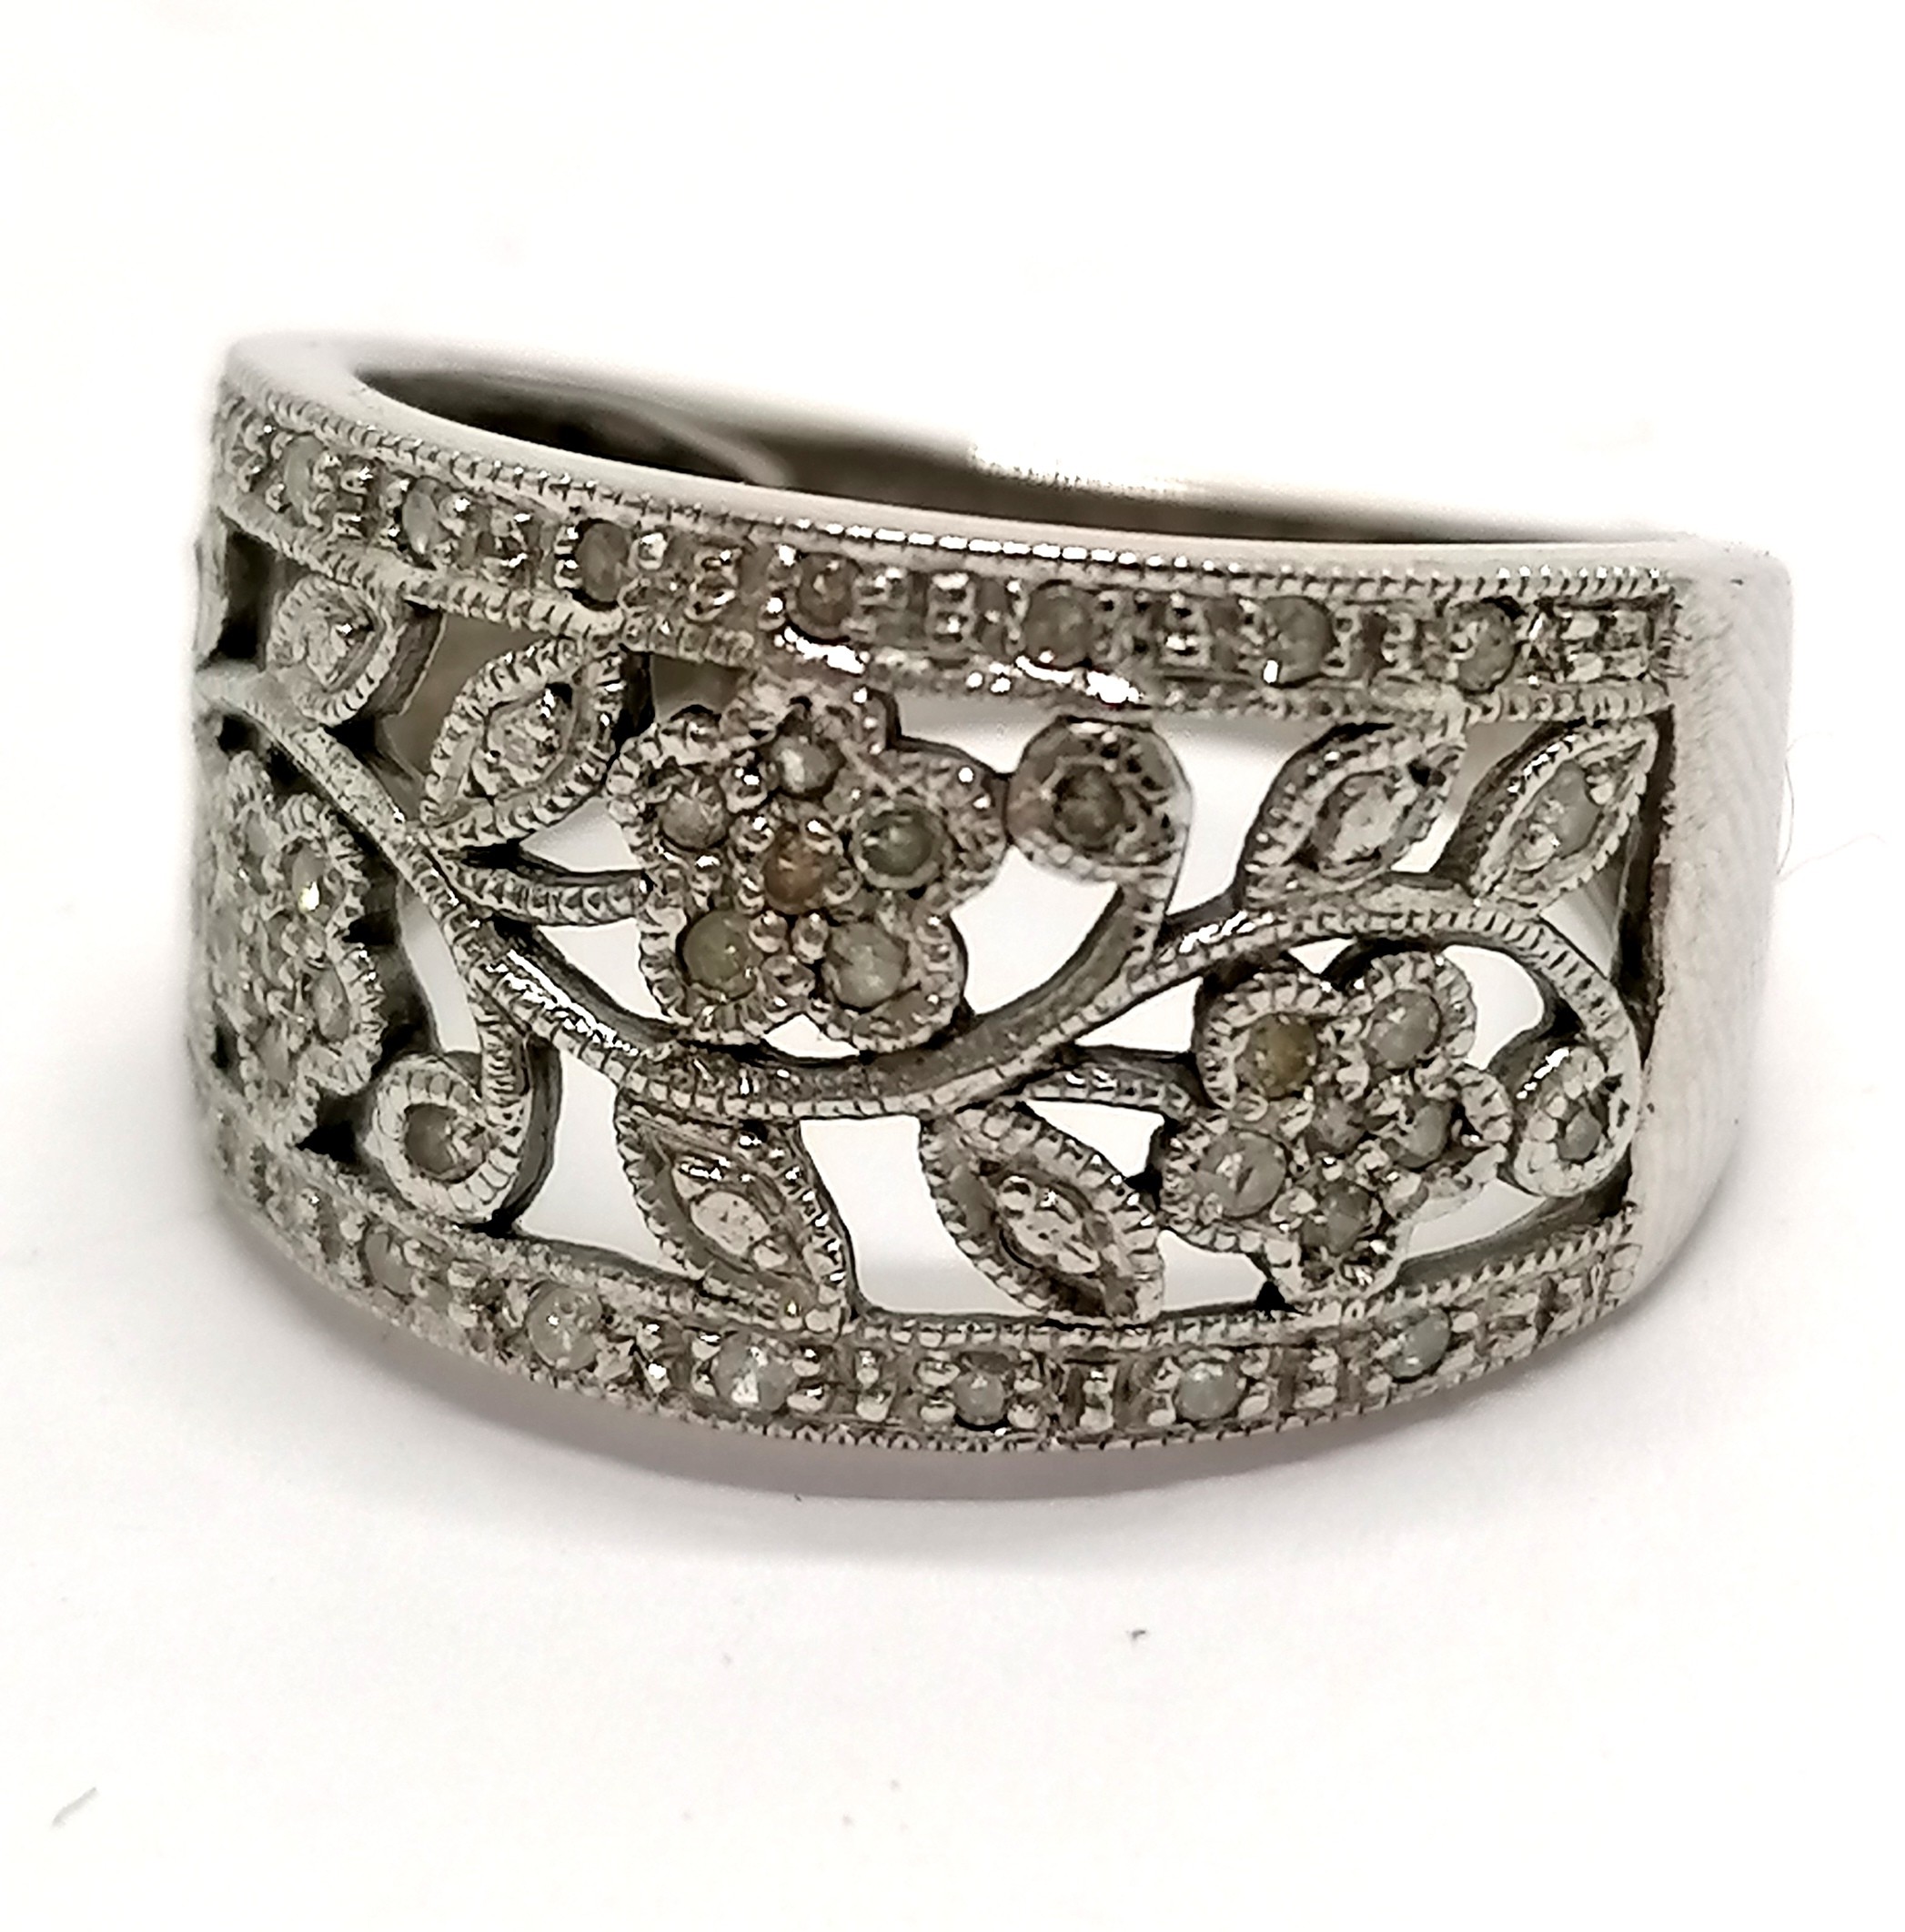 9ct hallmarked white gold diamond set pierced flower decorated ring - size N½ & 4.4g total weight - Image 3 of 3